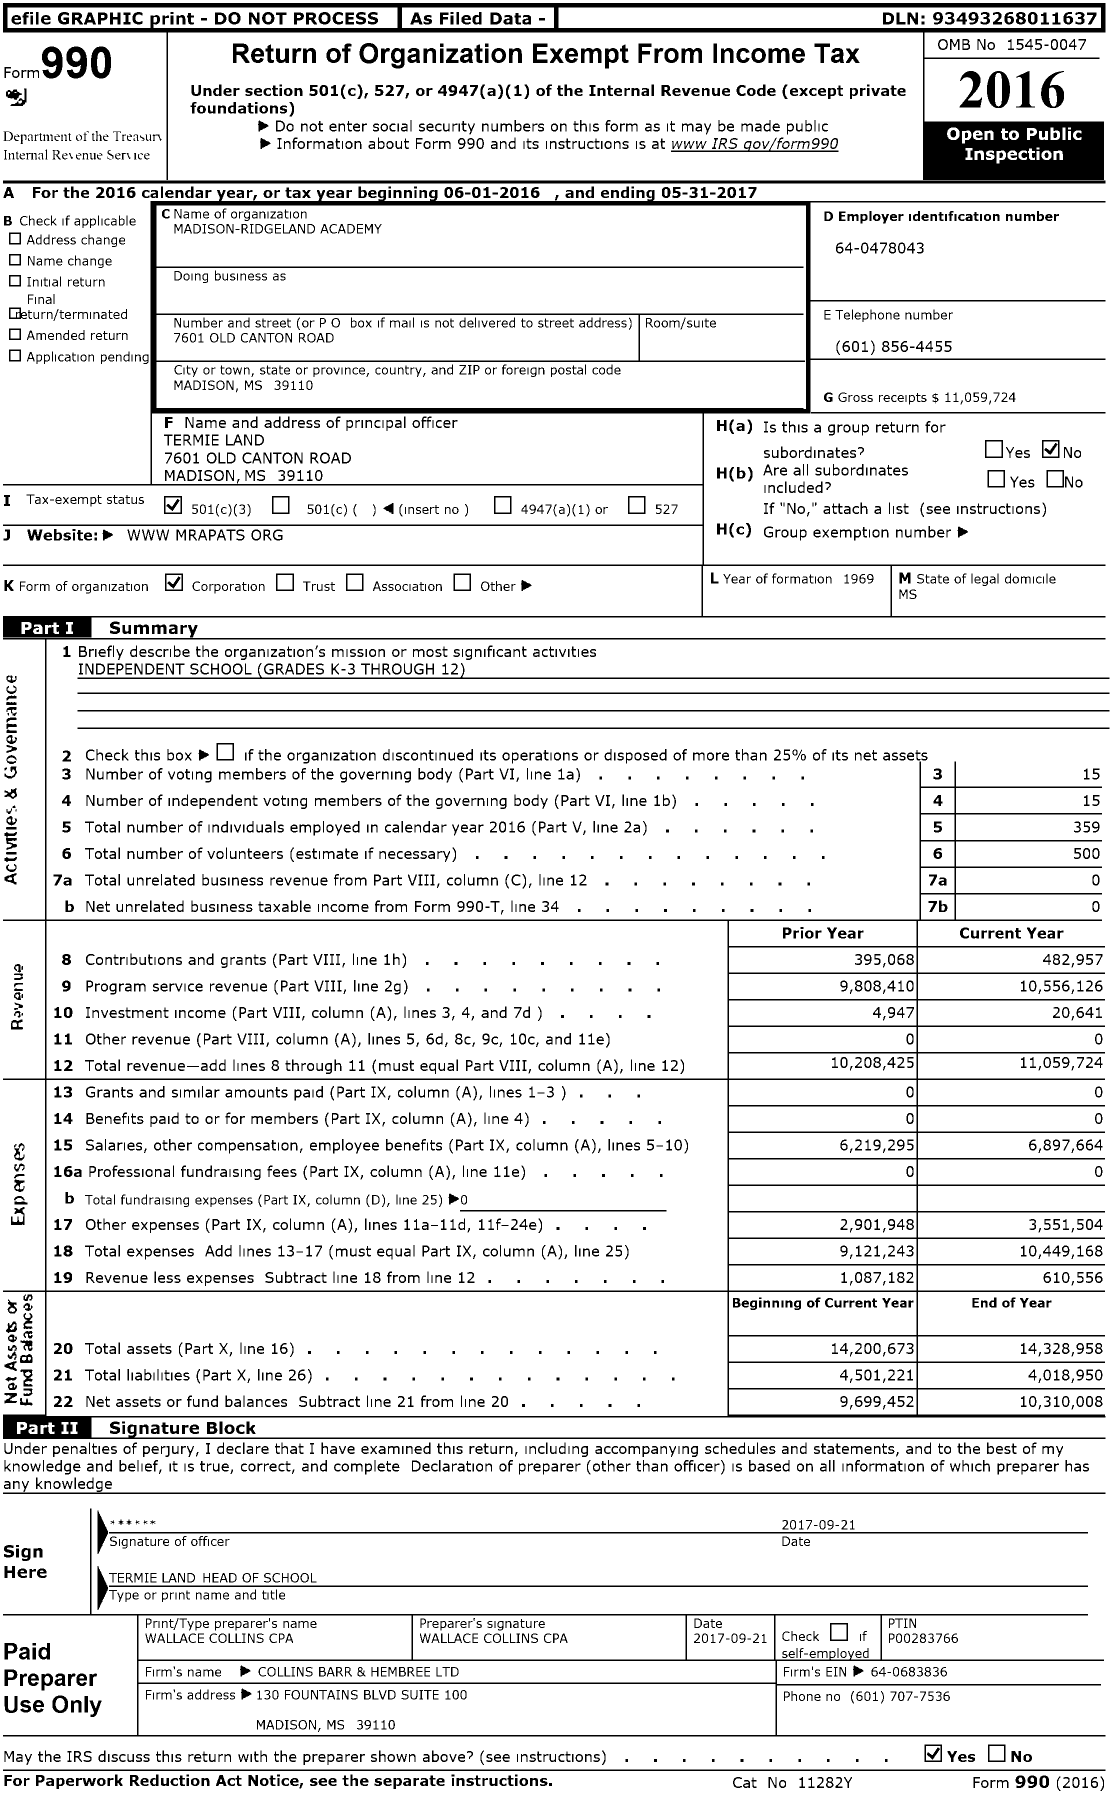 Image of first page of 2016 Form 990 for Madison-Ridgeland Academy (MRA)